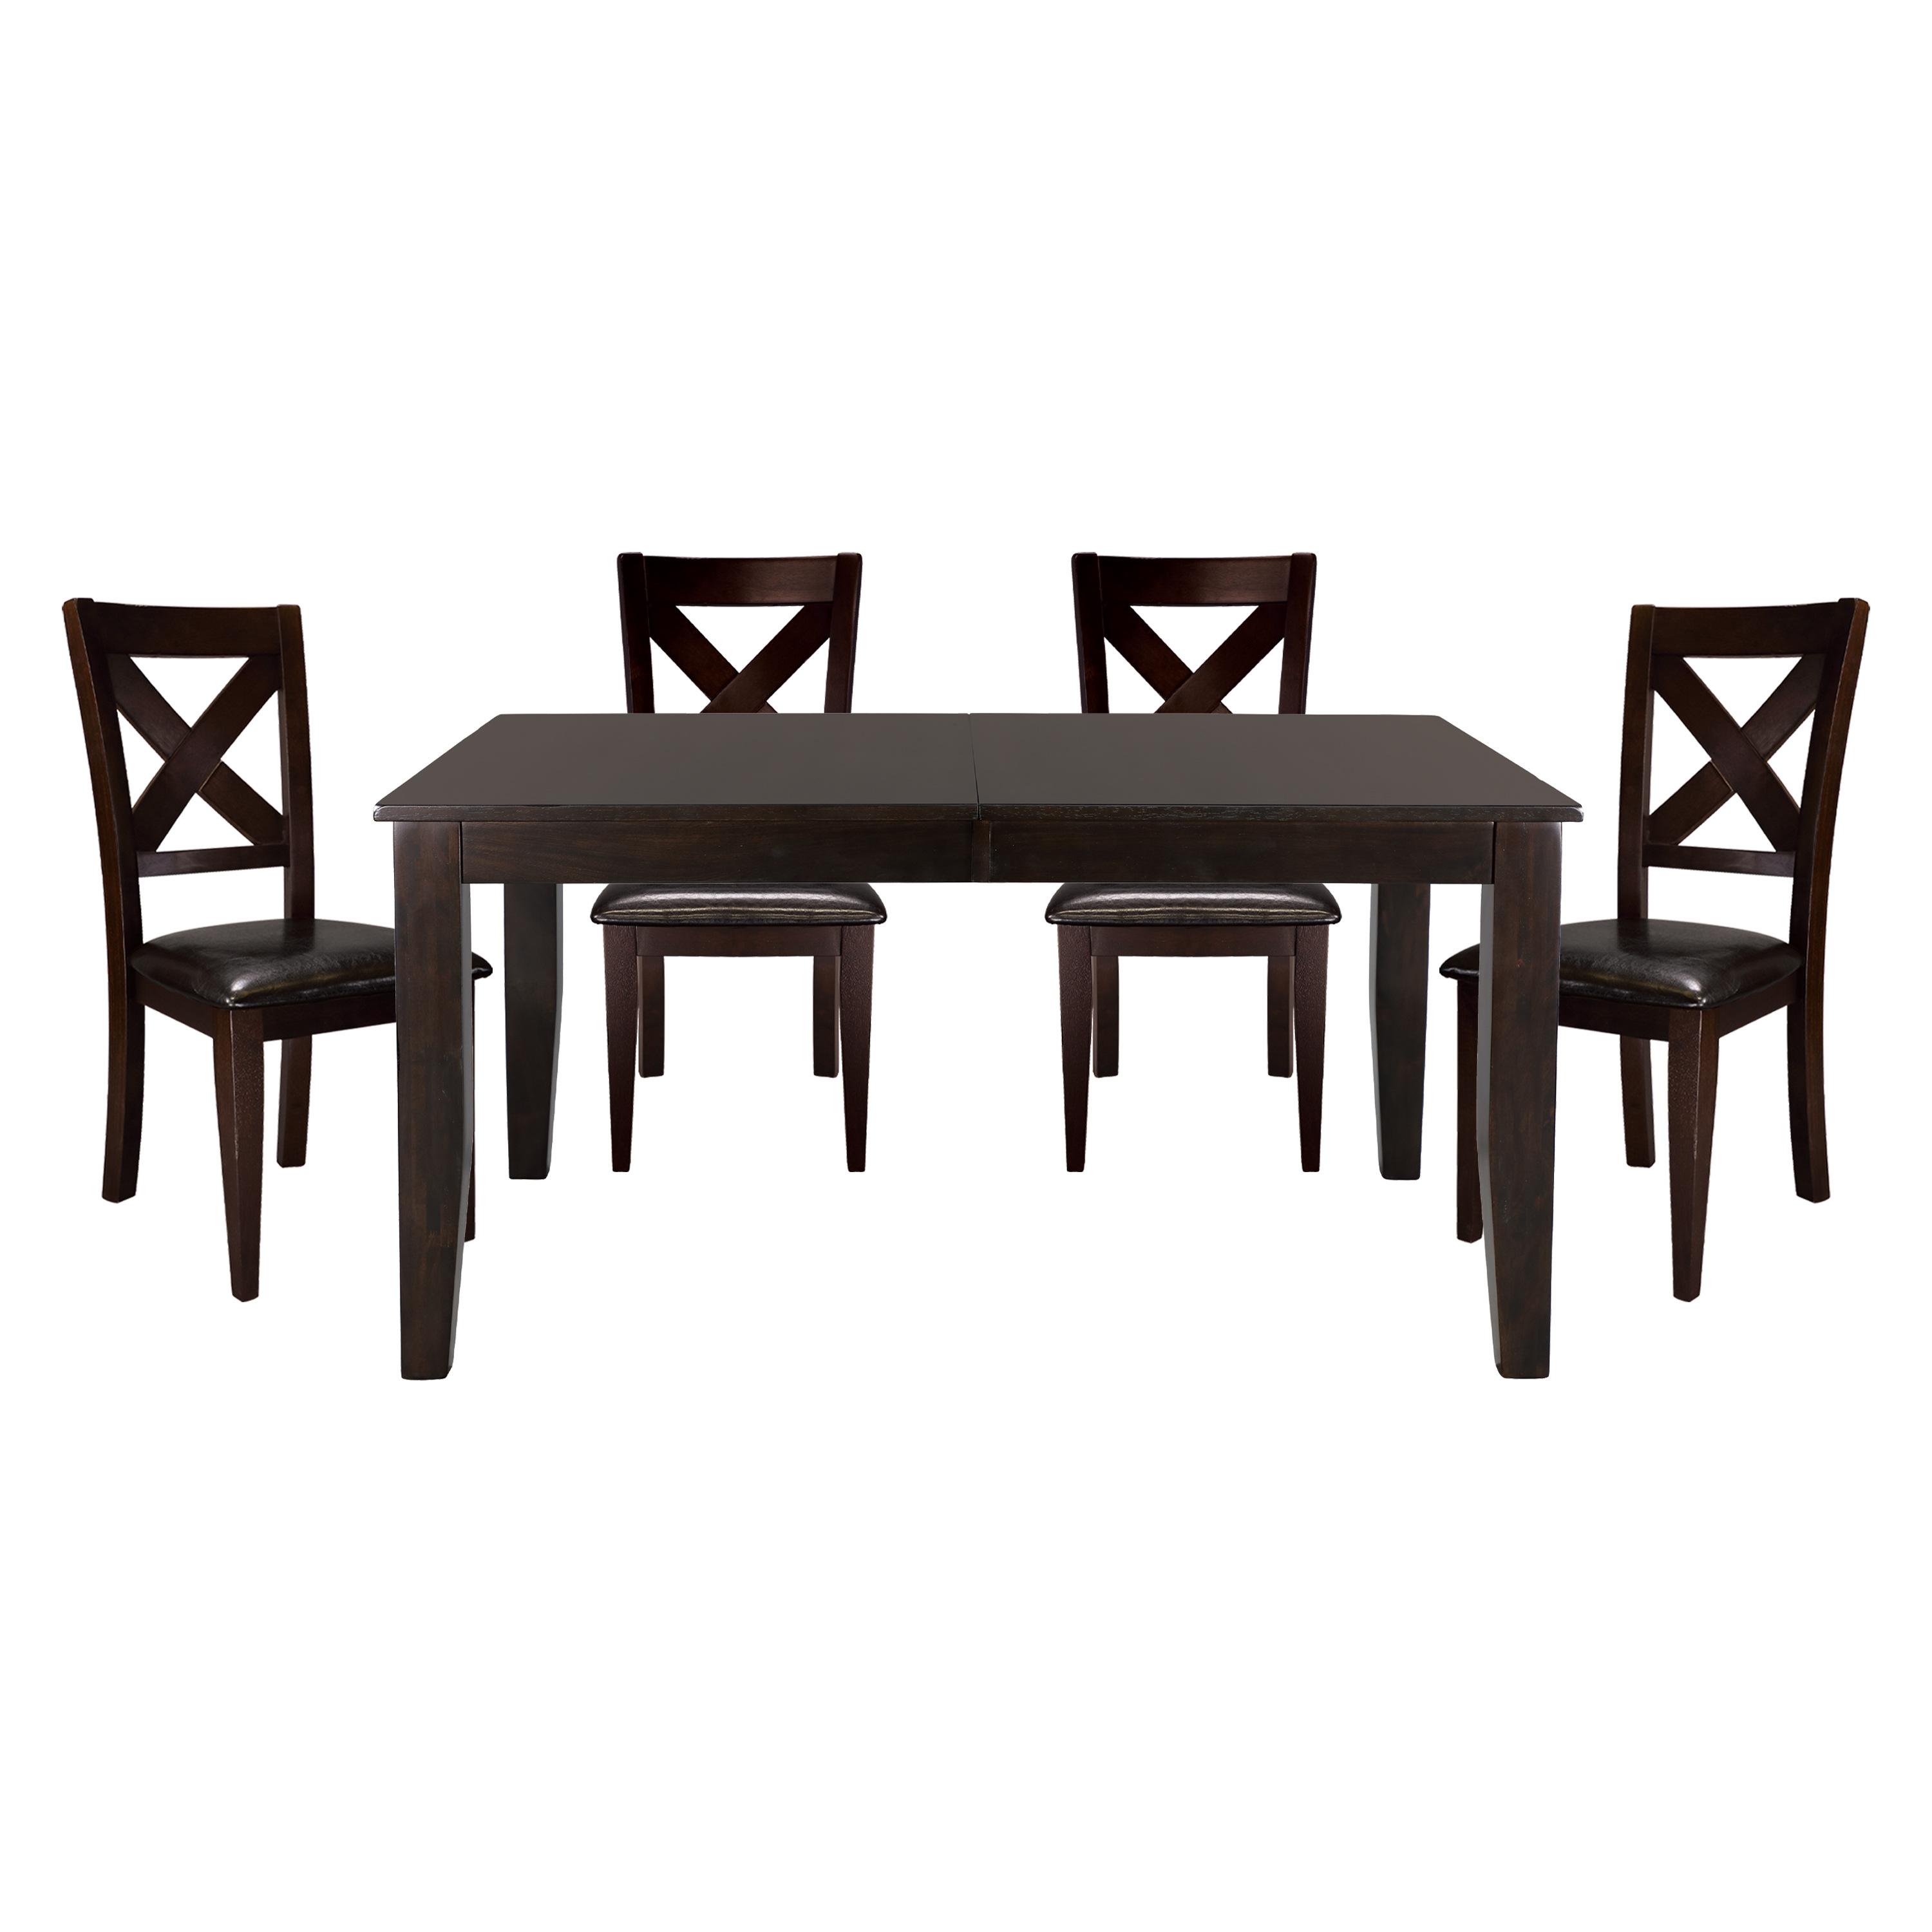 Casual Dining Room Set 1372-78*5PC Crown Point 1372-78*5PC in Merlot Faux Leather